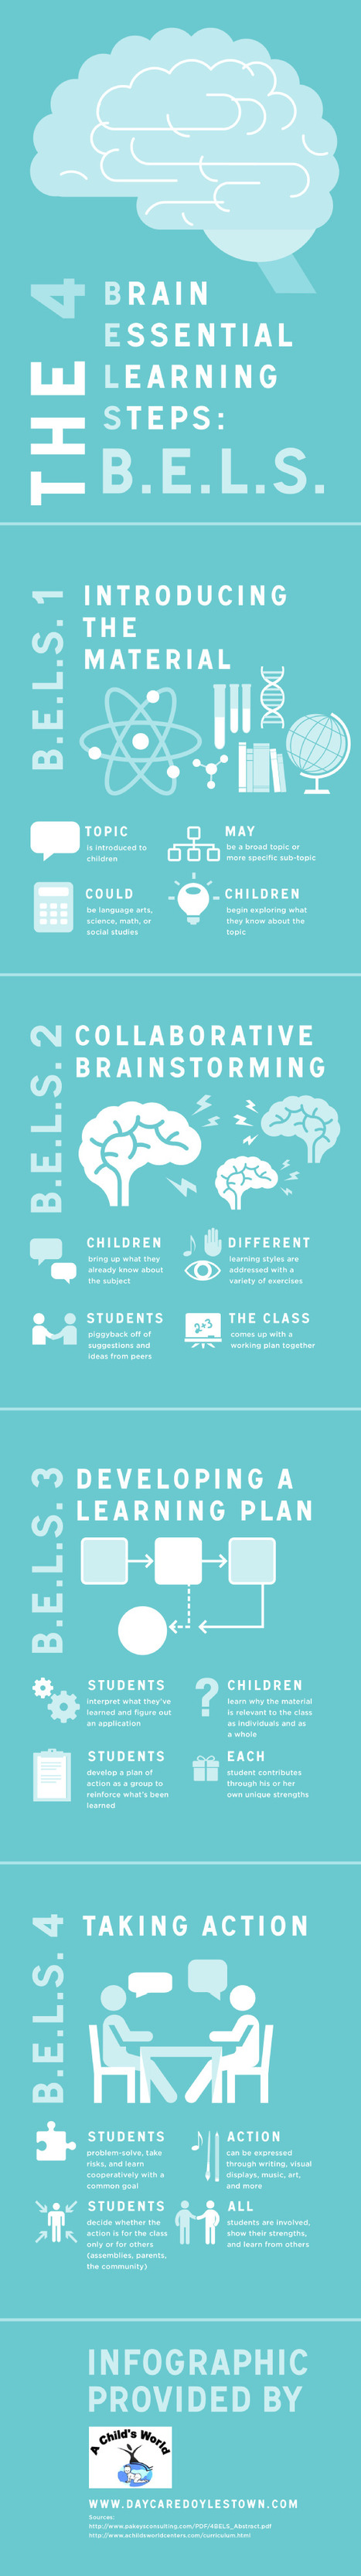 The 4 Brain Essential Learning Steps [Infographic] | Strictly pedagogical | Scoop.it